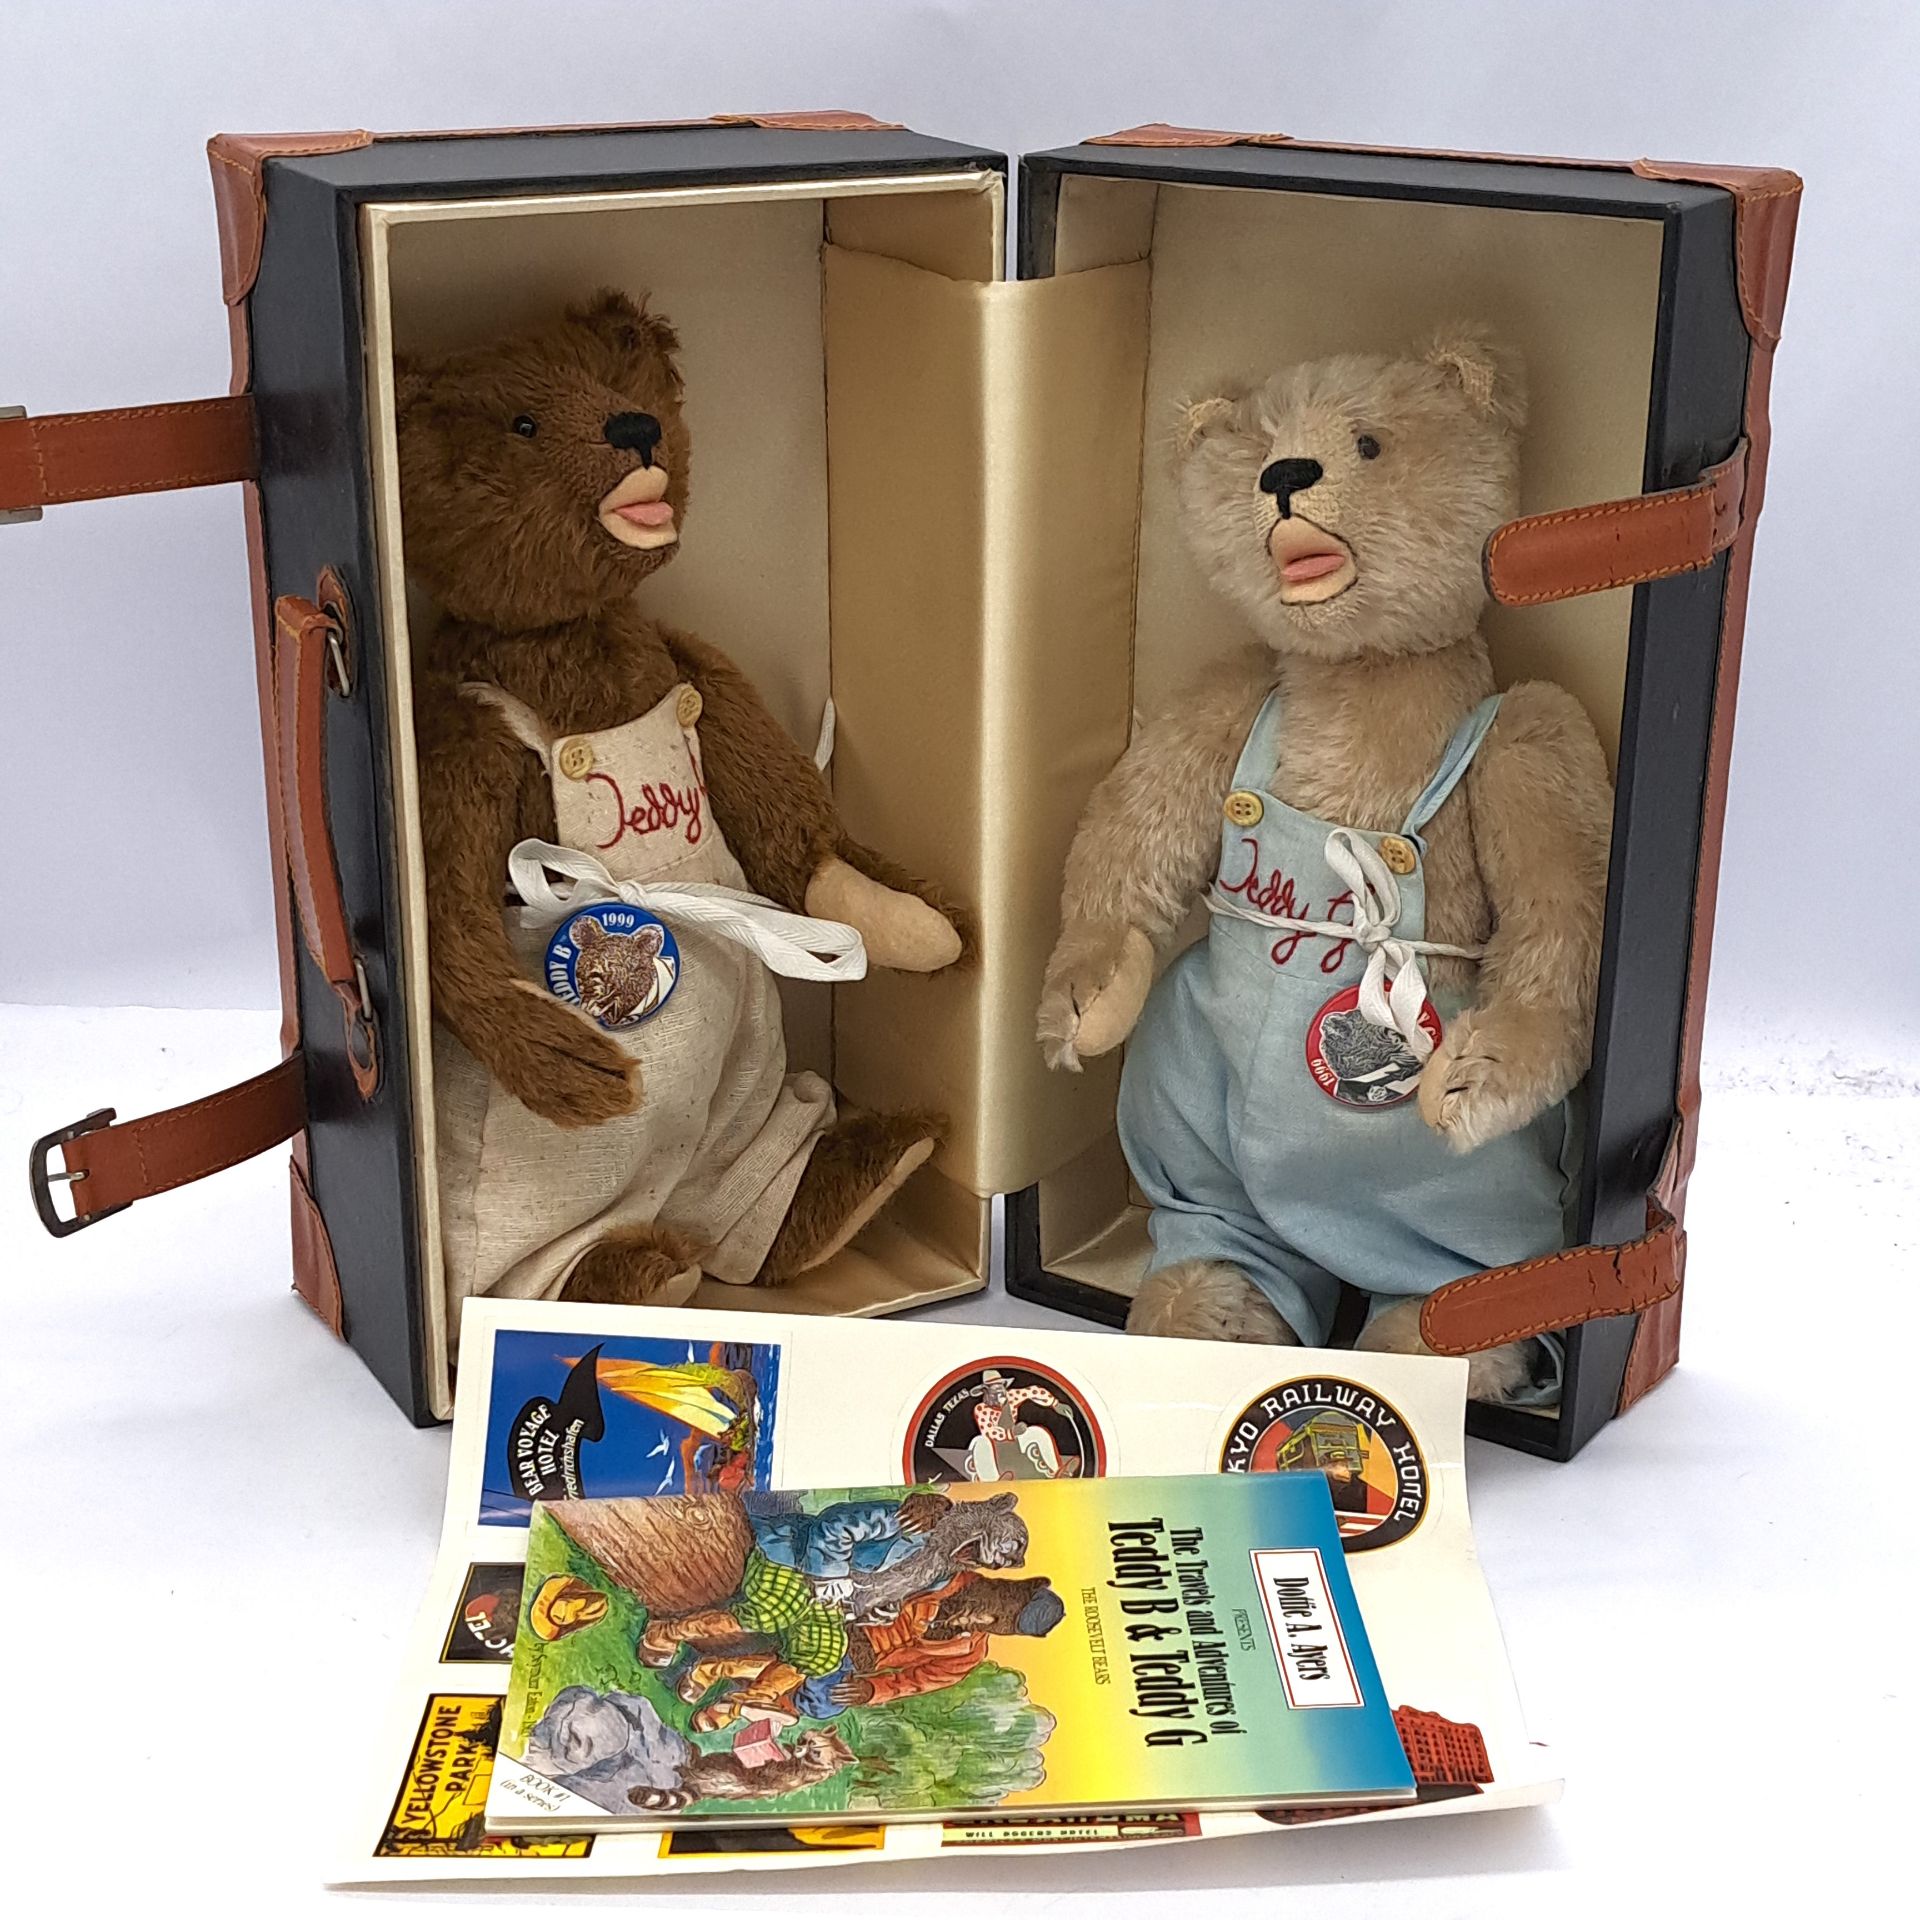 Dottie A. Ayers/The Calico Teddy Teddy B & Teddy G with book, suitcase and accessories